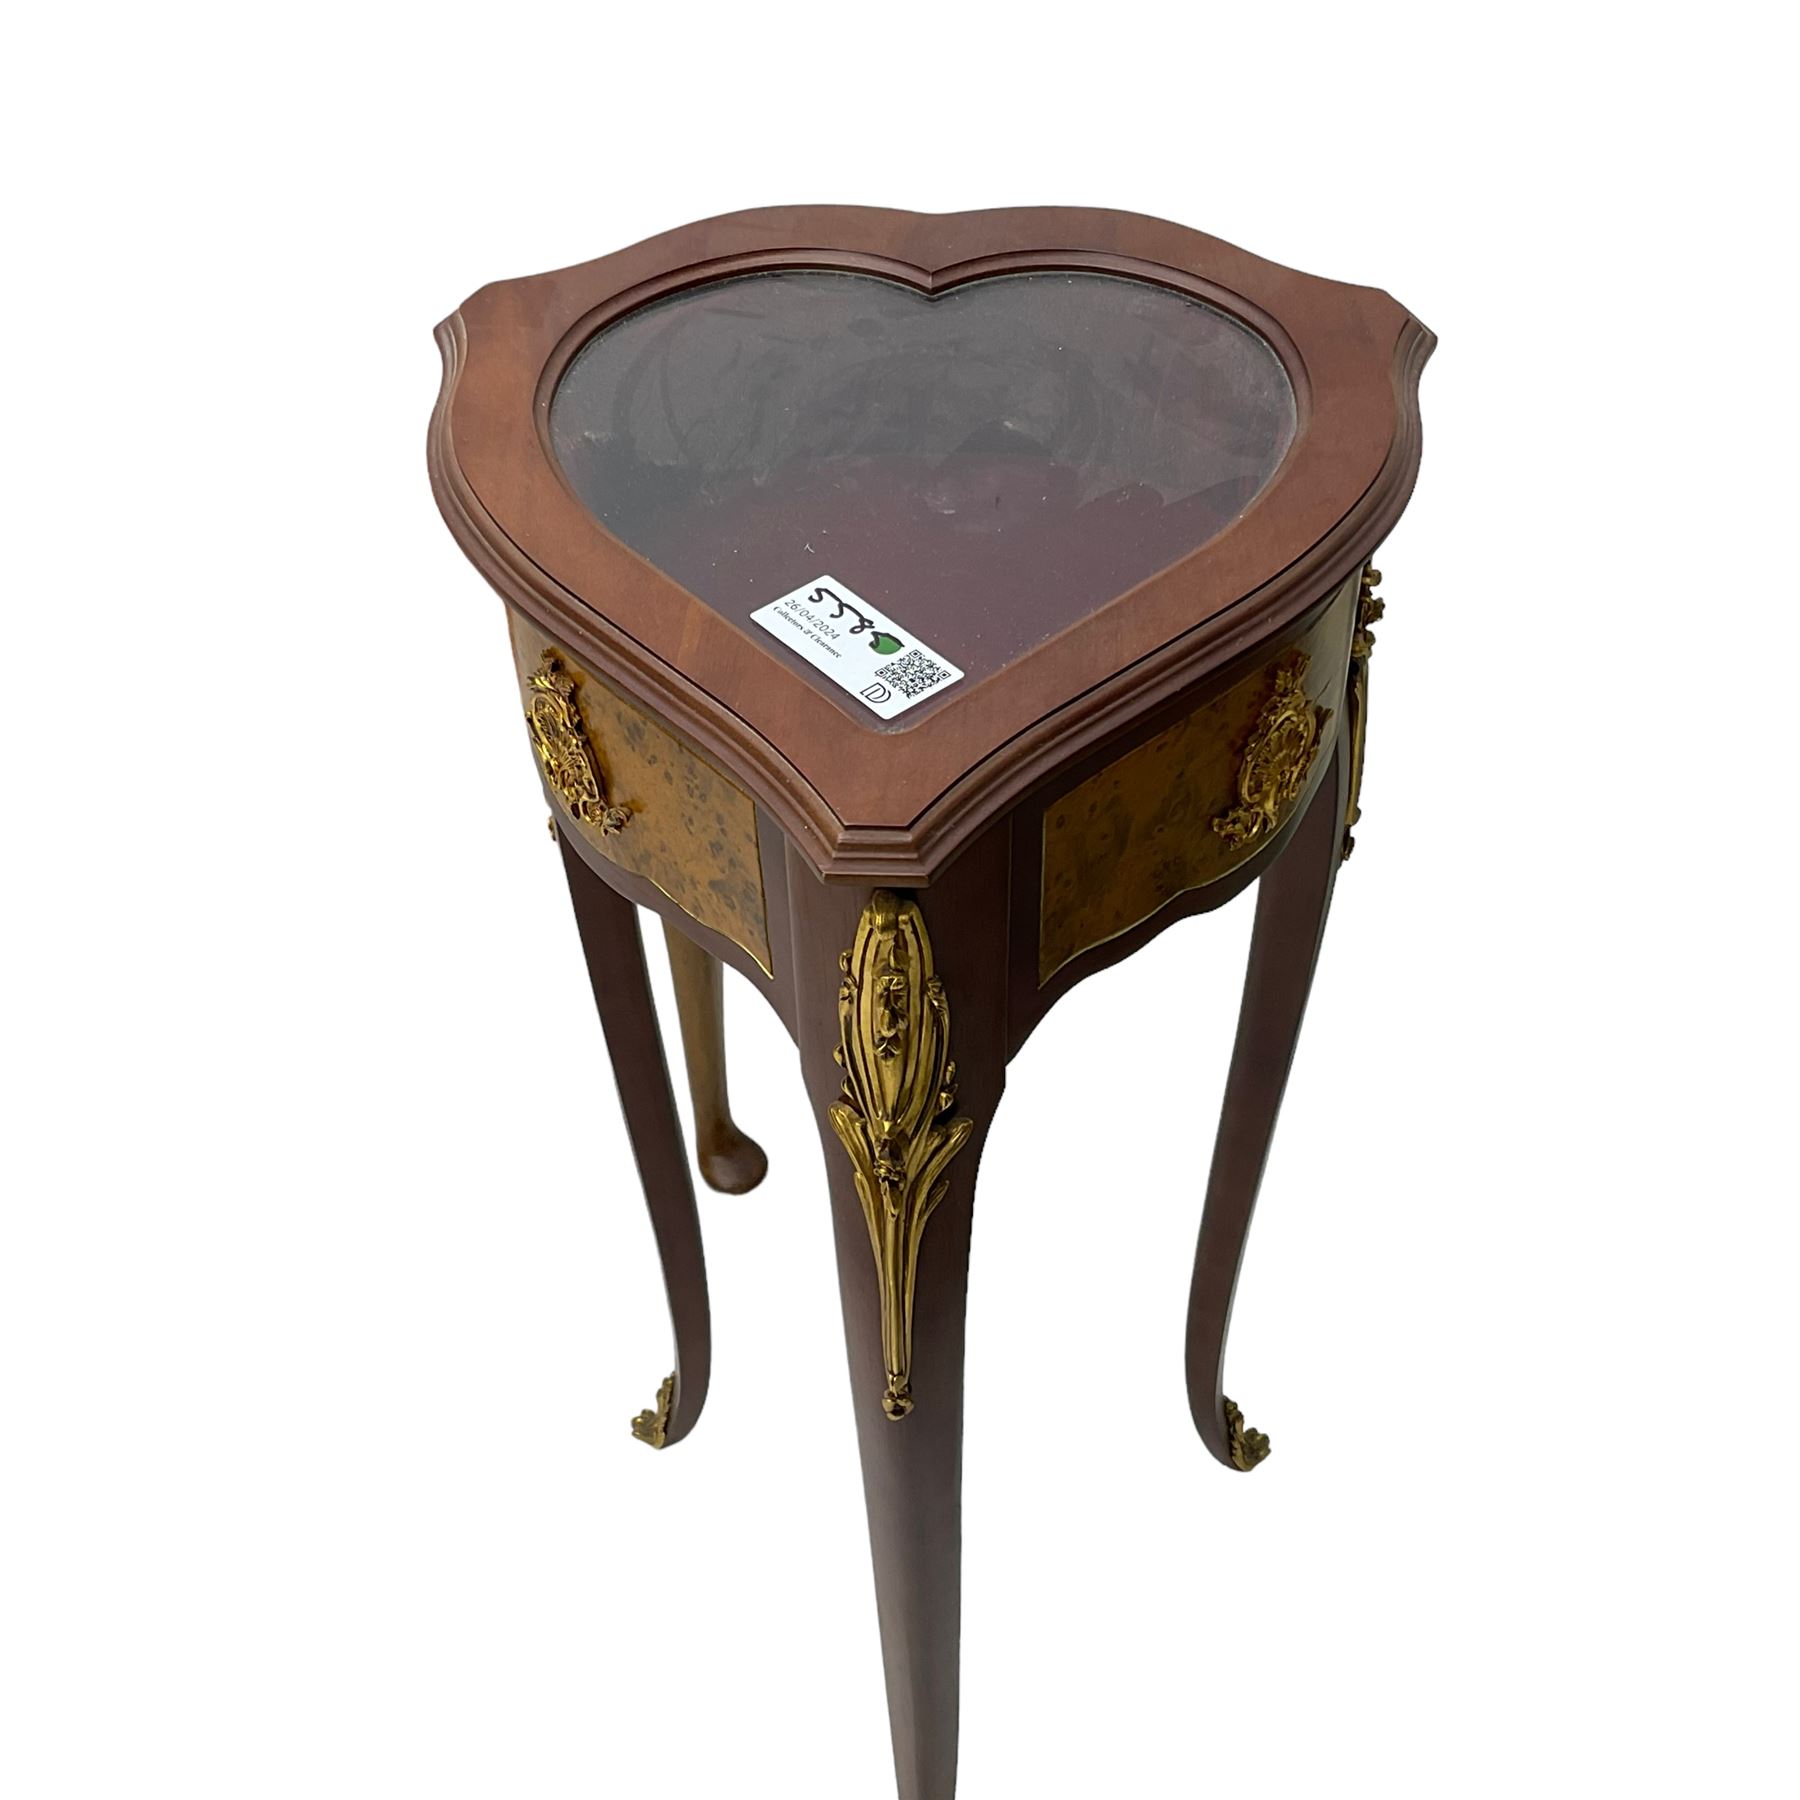 20th century cabriole leg stool; heart shaped bijouterie cabinet; wrought metal candle stand; small - Image 3 of 6